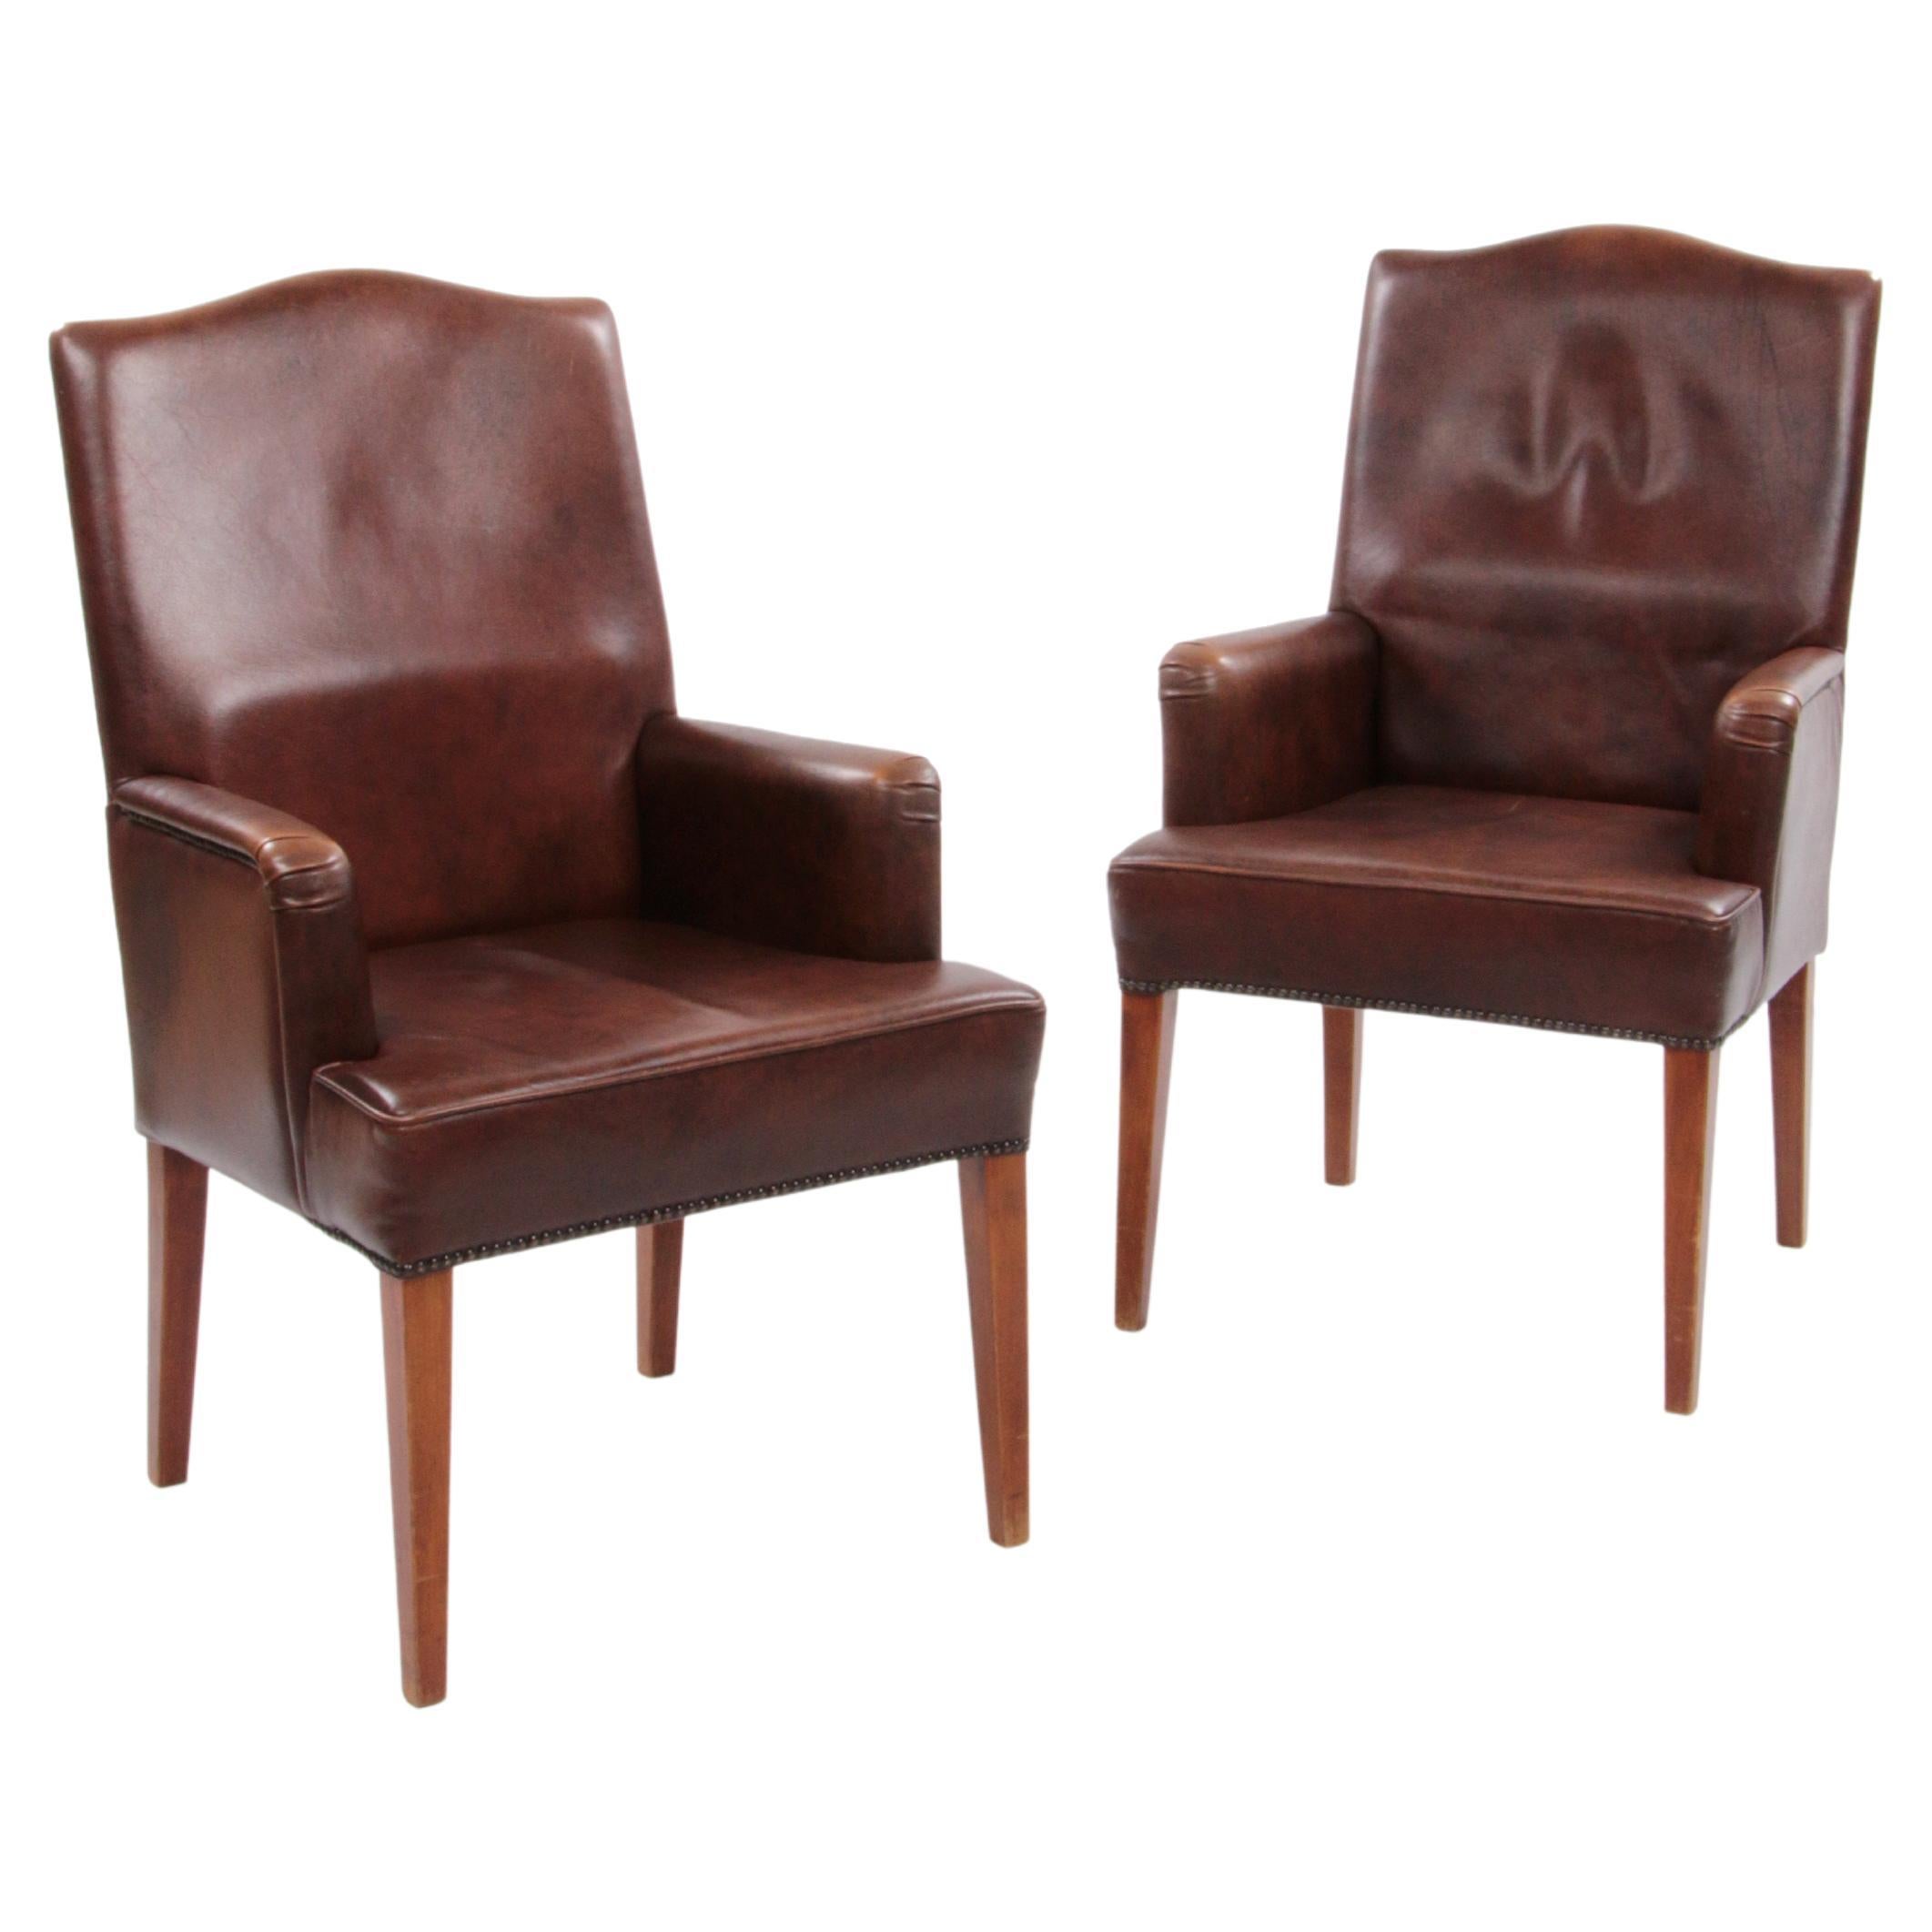 Set of 2 dining room chairs in sheep leather, 1970 Netherlands.